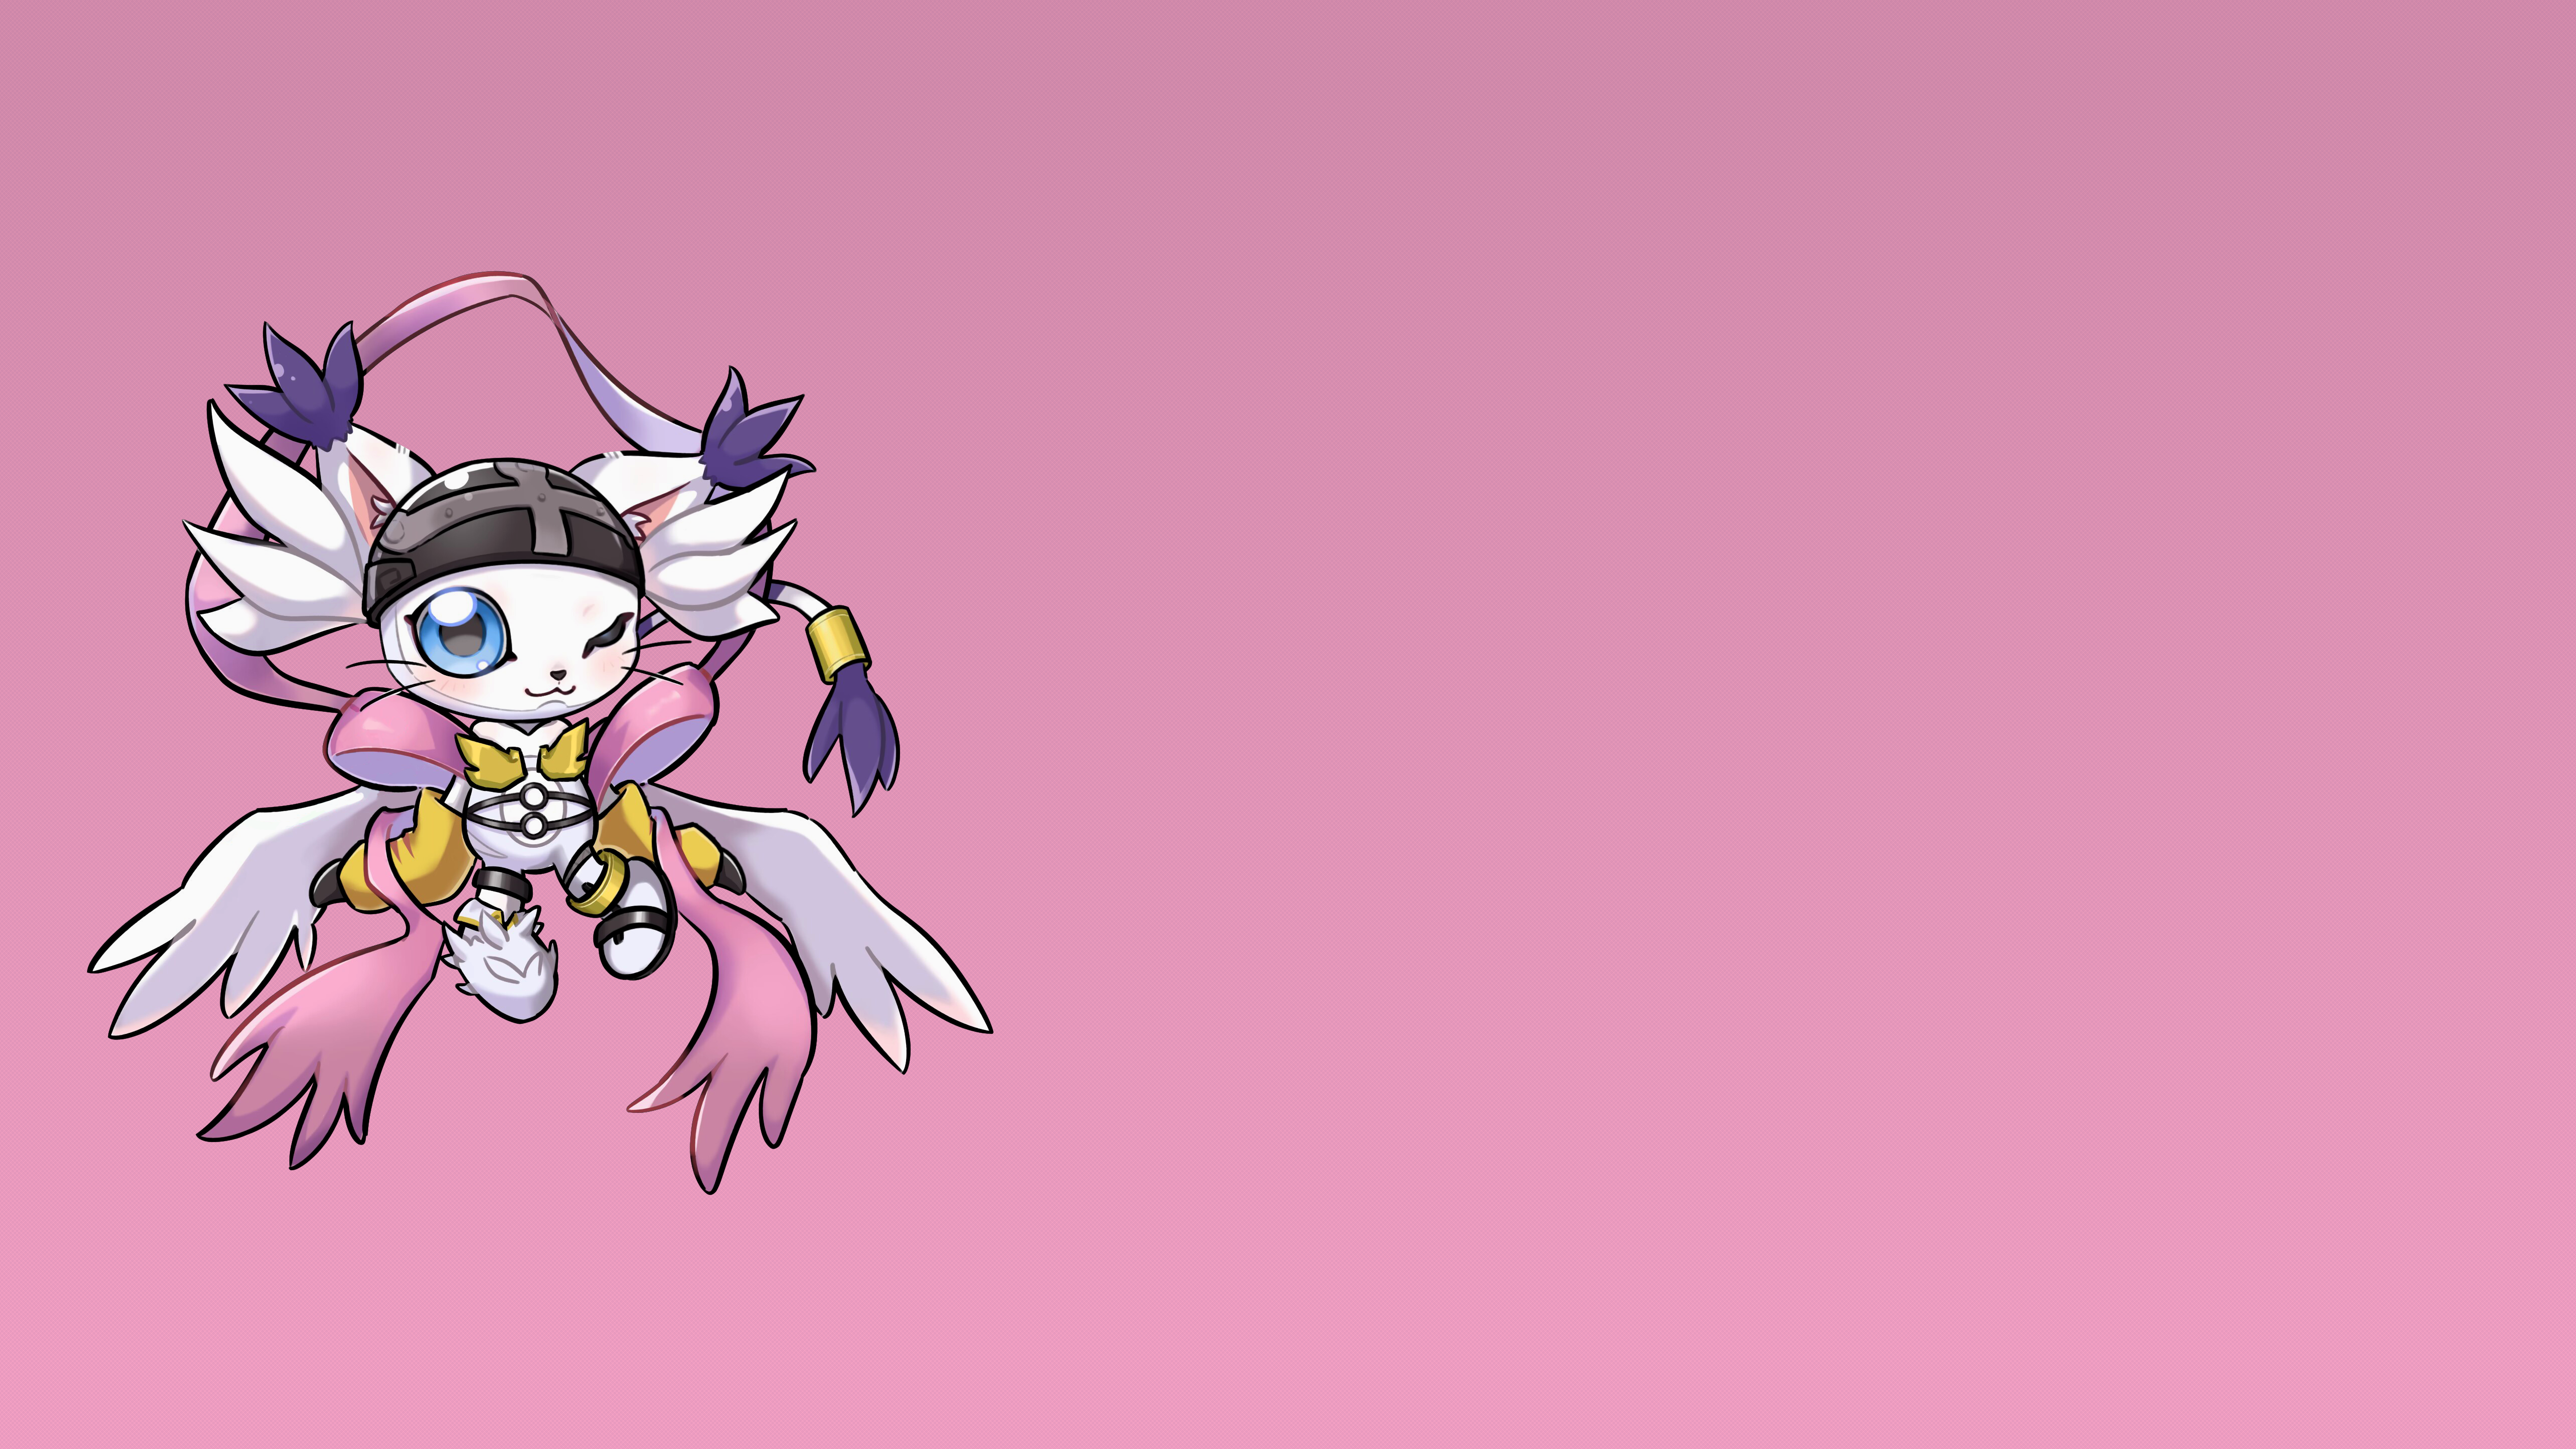 Anime 5120x2880 boots gloves blue eyes looking at viewer Digimon Gatomon angewomon cats animals claws costumes cosplay wink simple background ribbon angel wings angel wings helmet pink background Digimon Adventure